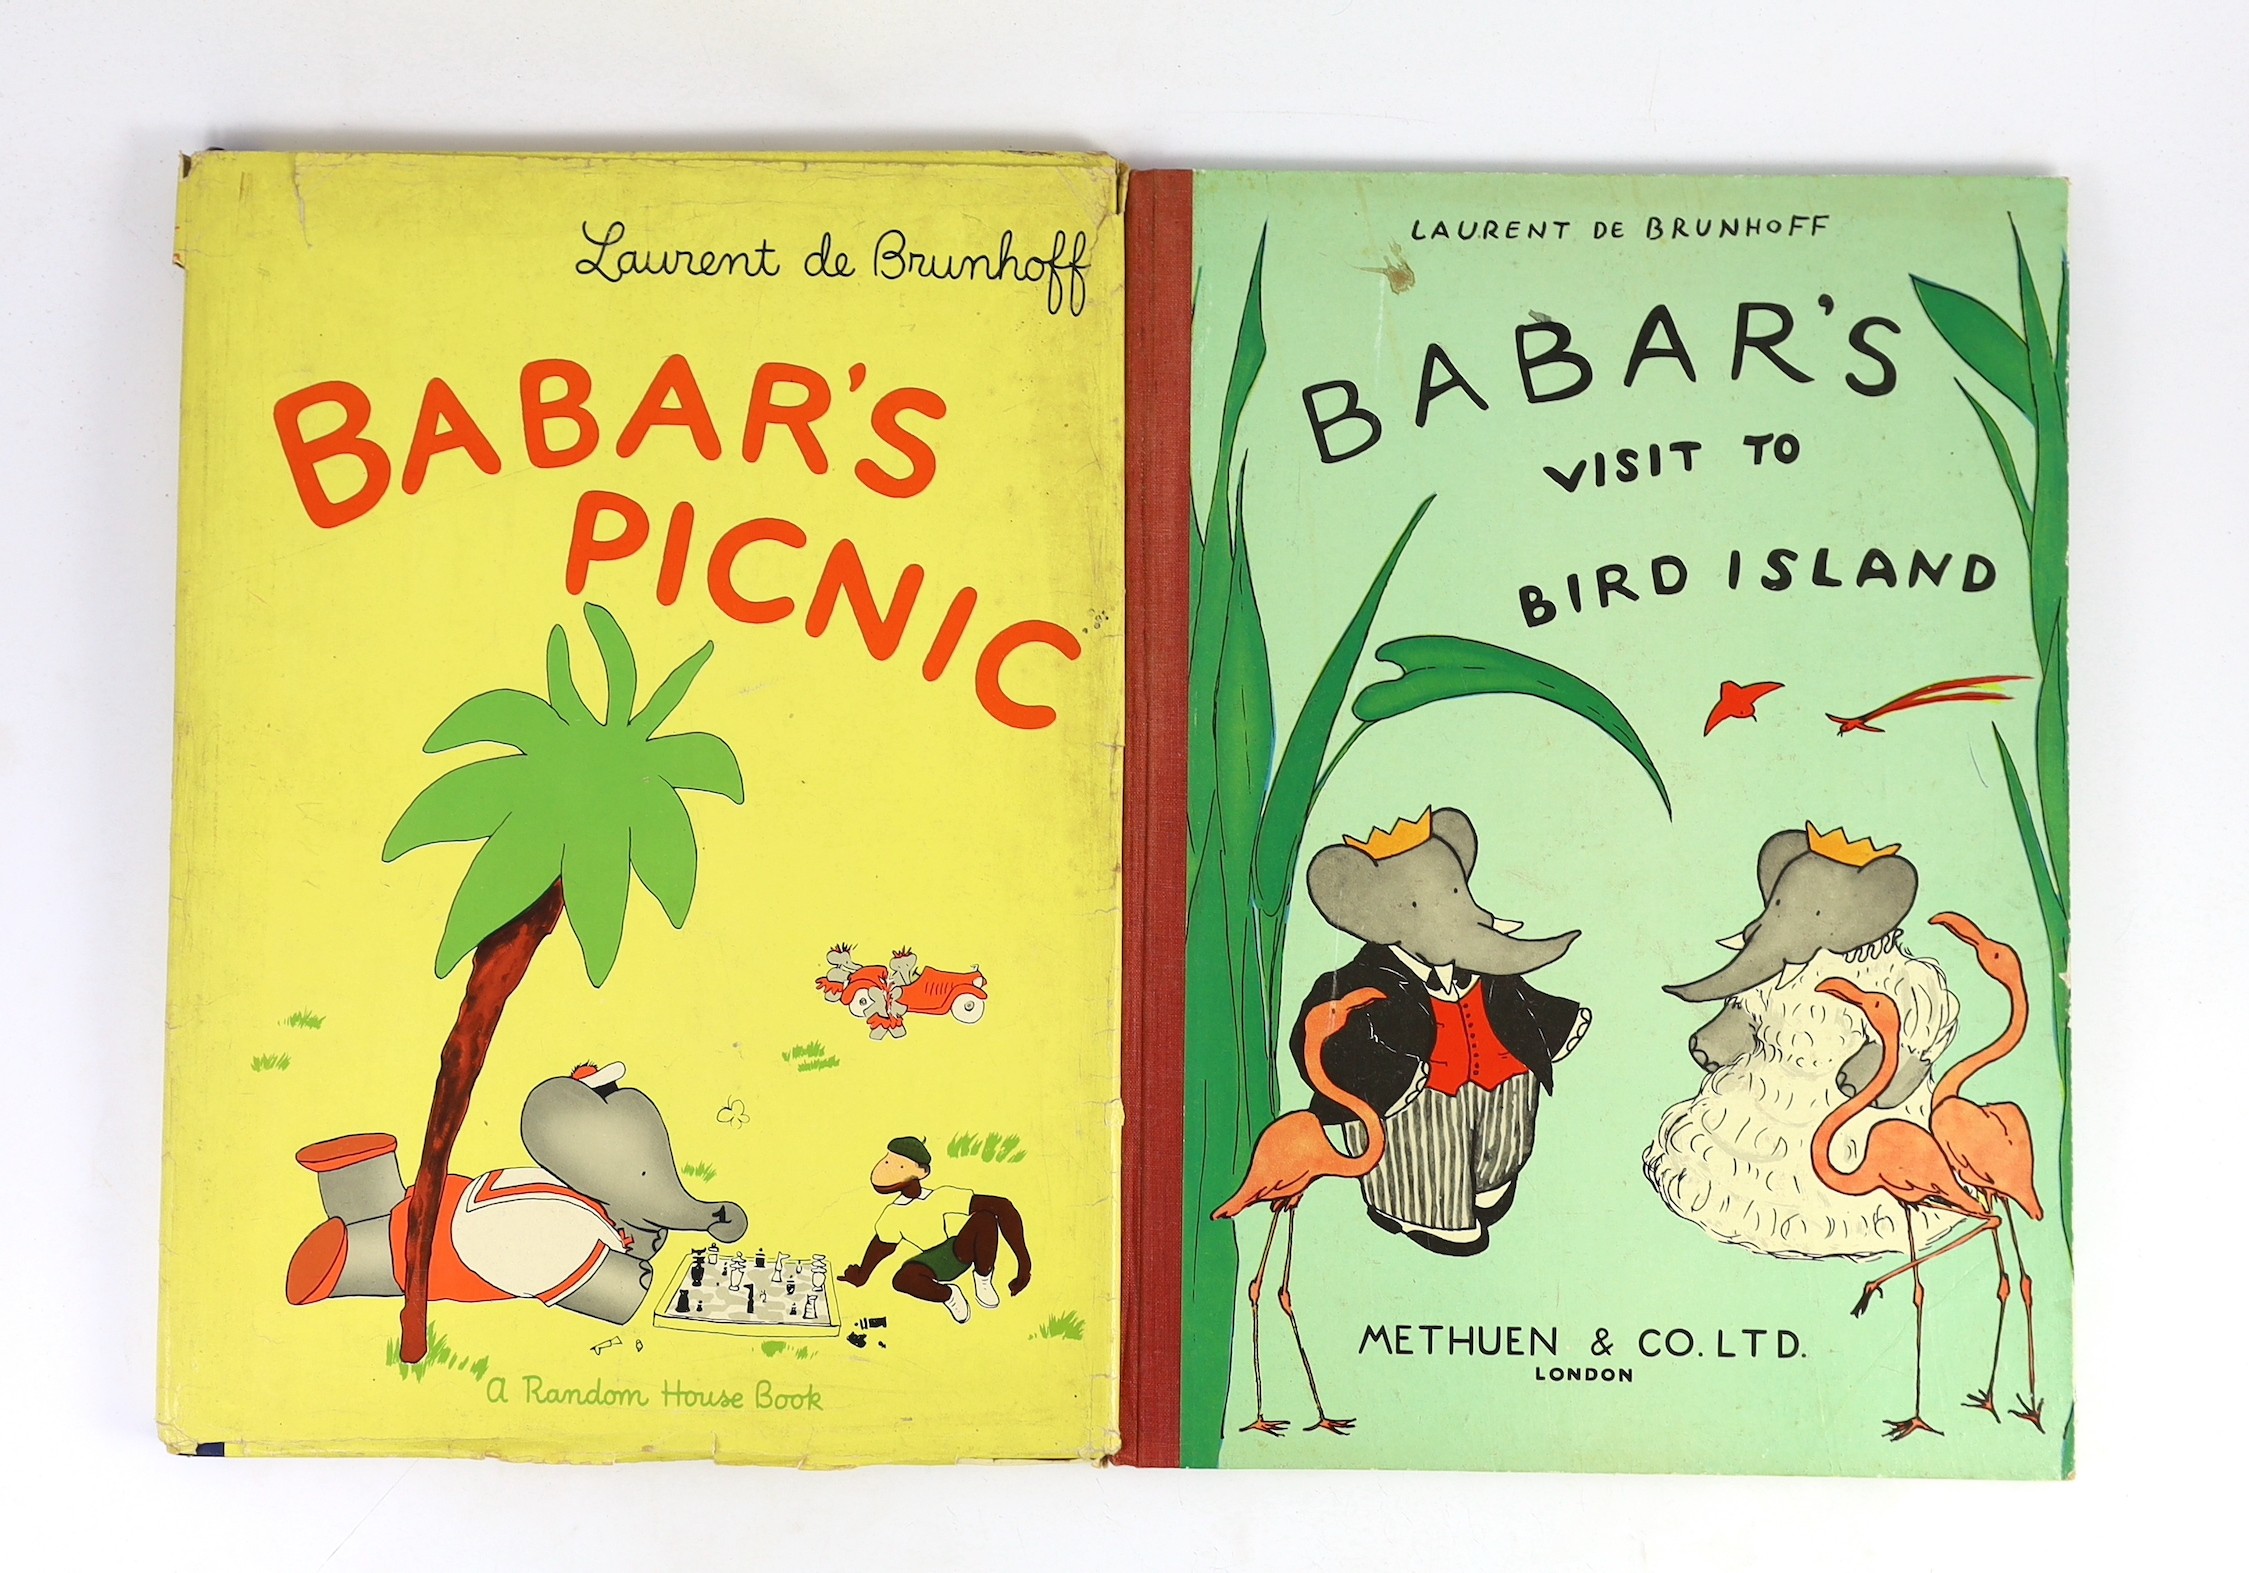 Brunhoff, Laurent de -2 works - Babar’s Picnic, folio, pictorial boards with d/j, translated by Merle Haas, Random House, New York, 1947 and Babar’s Visit to Bird Island, folio, pictorial boards, Methuen & Co., Ltd, Lond